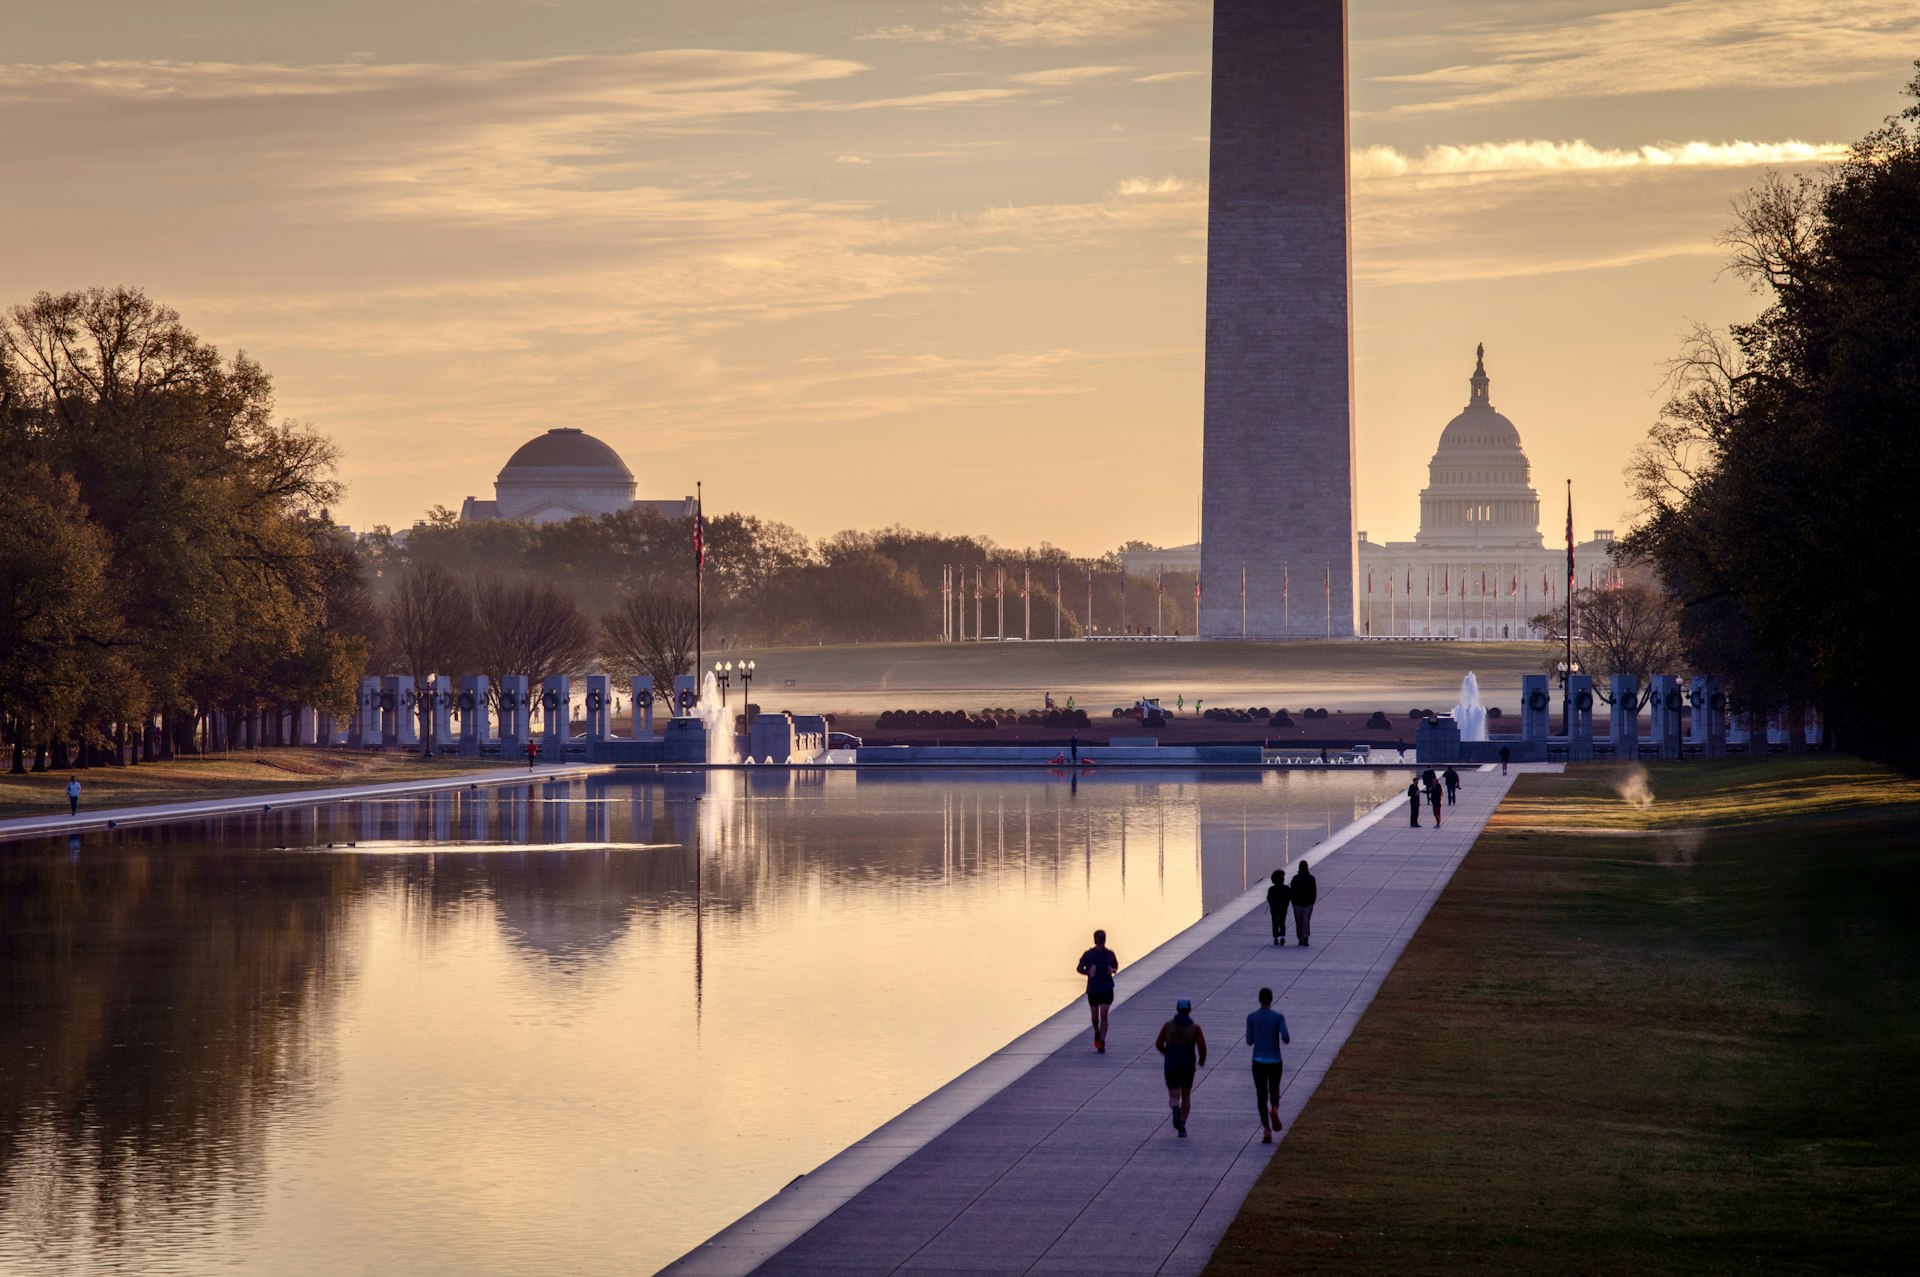 Vibrant sunrise over the National Mall in Washington DC, with people walking and running in the foreground